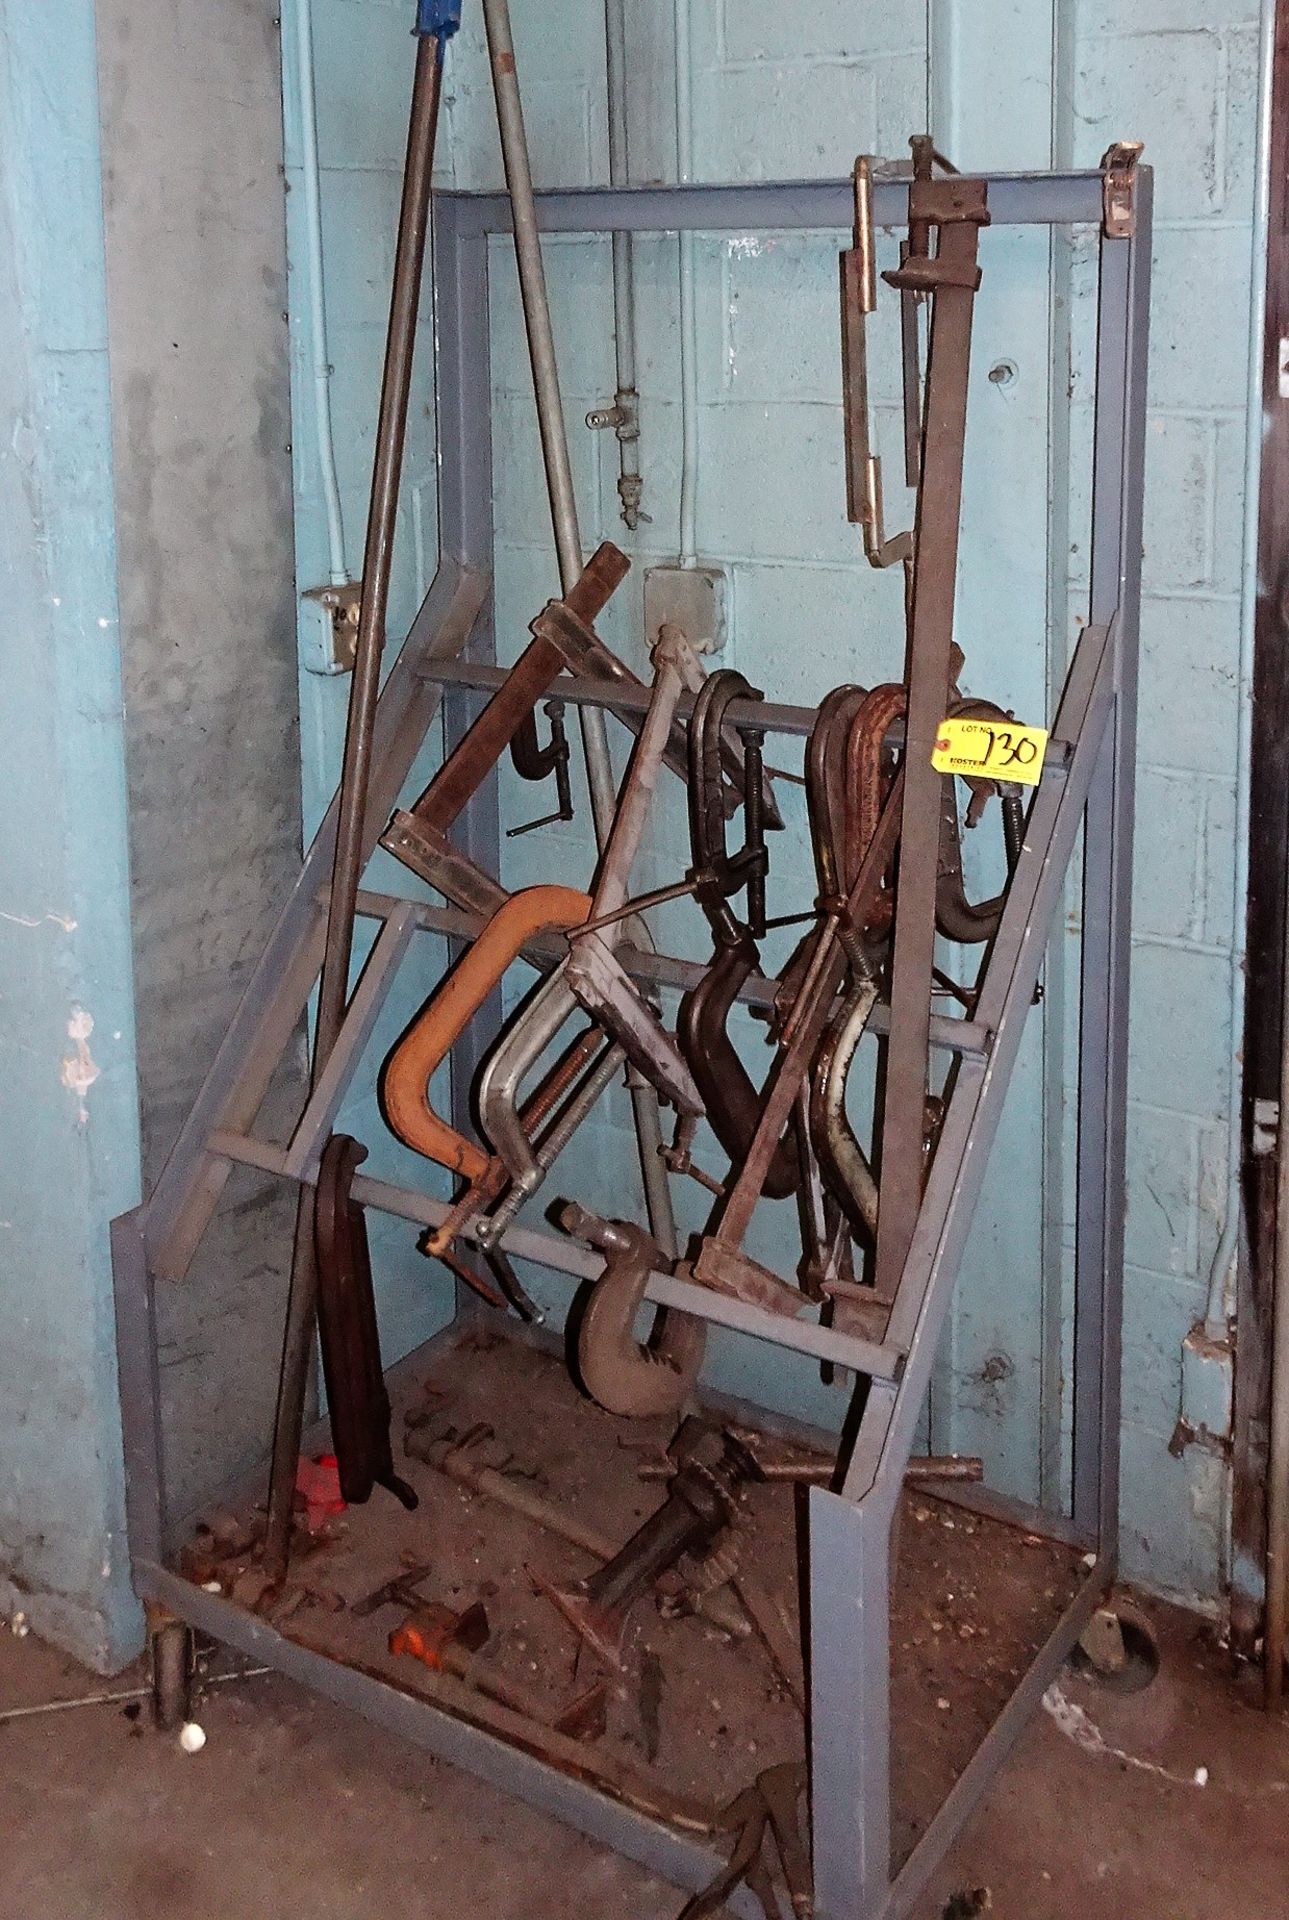 Castered Cantilevered Rack with Contents Consisting of: Bar Clamps, C-Clamps, Welding Clamps